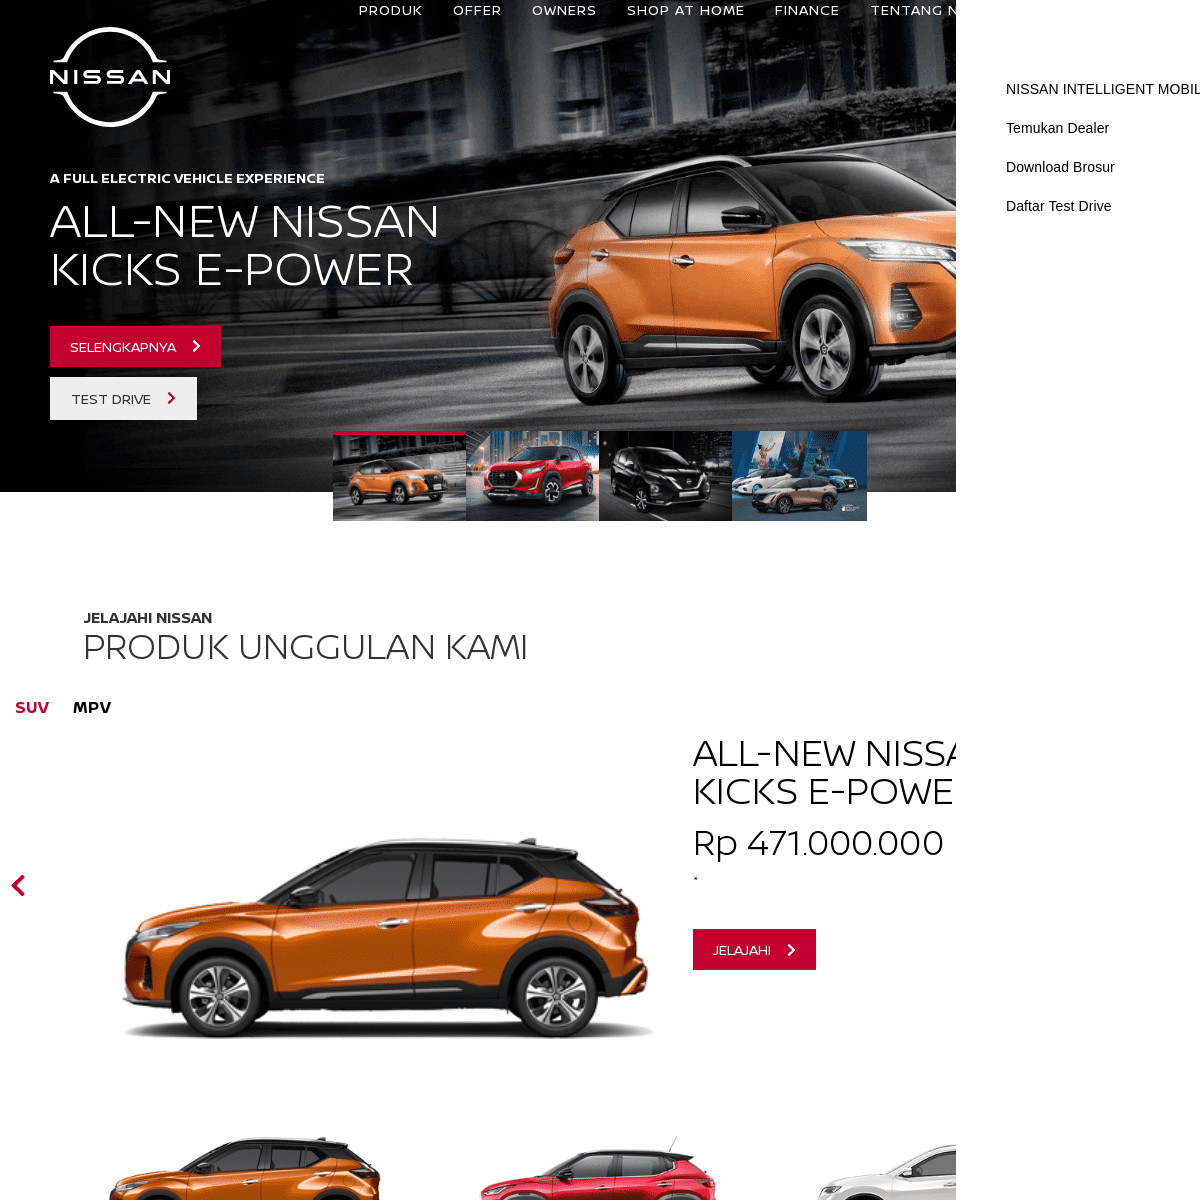 A complete backup of https://nissan.co.id